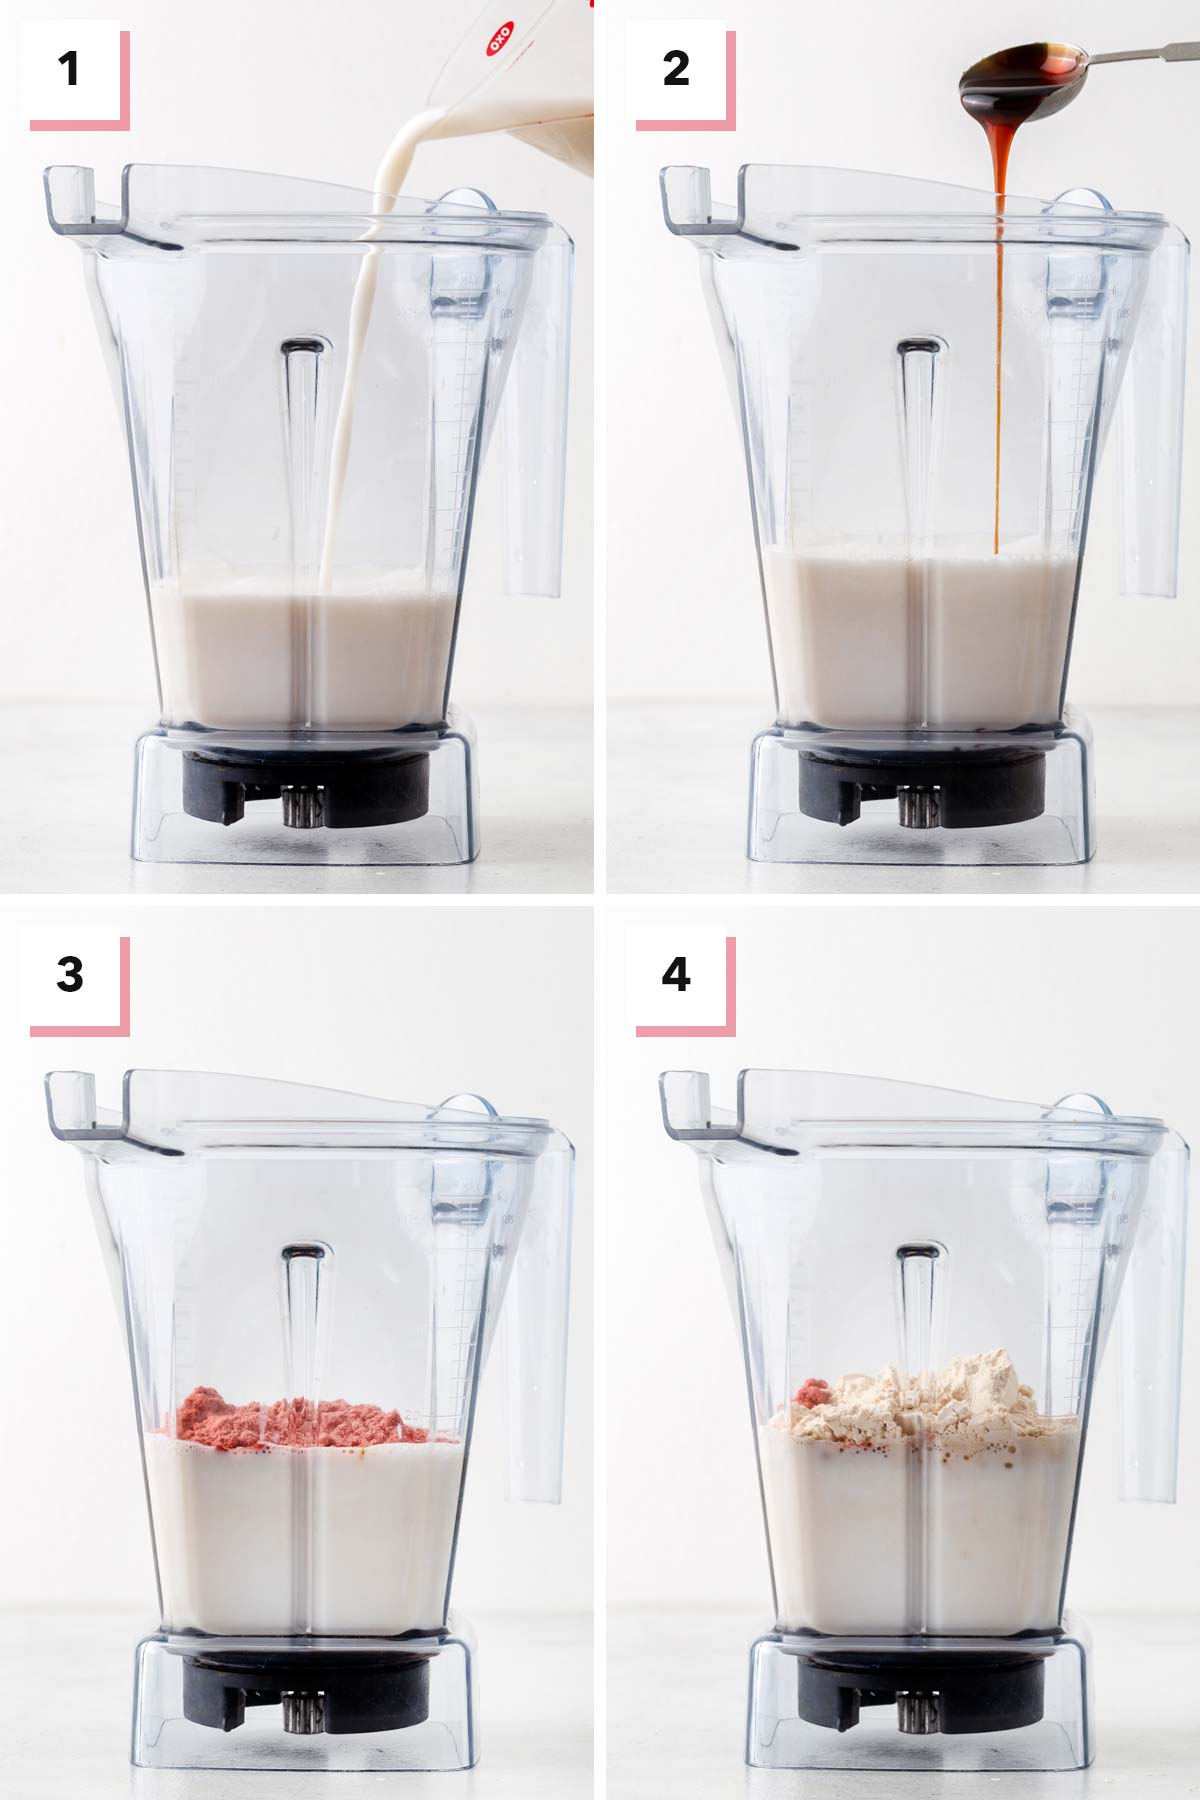 Steps for making a strawberry protein shake.